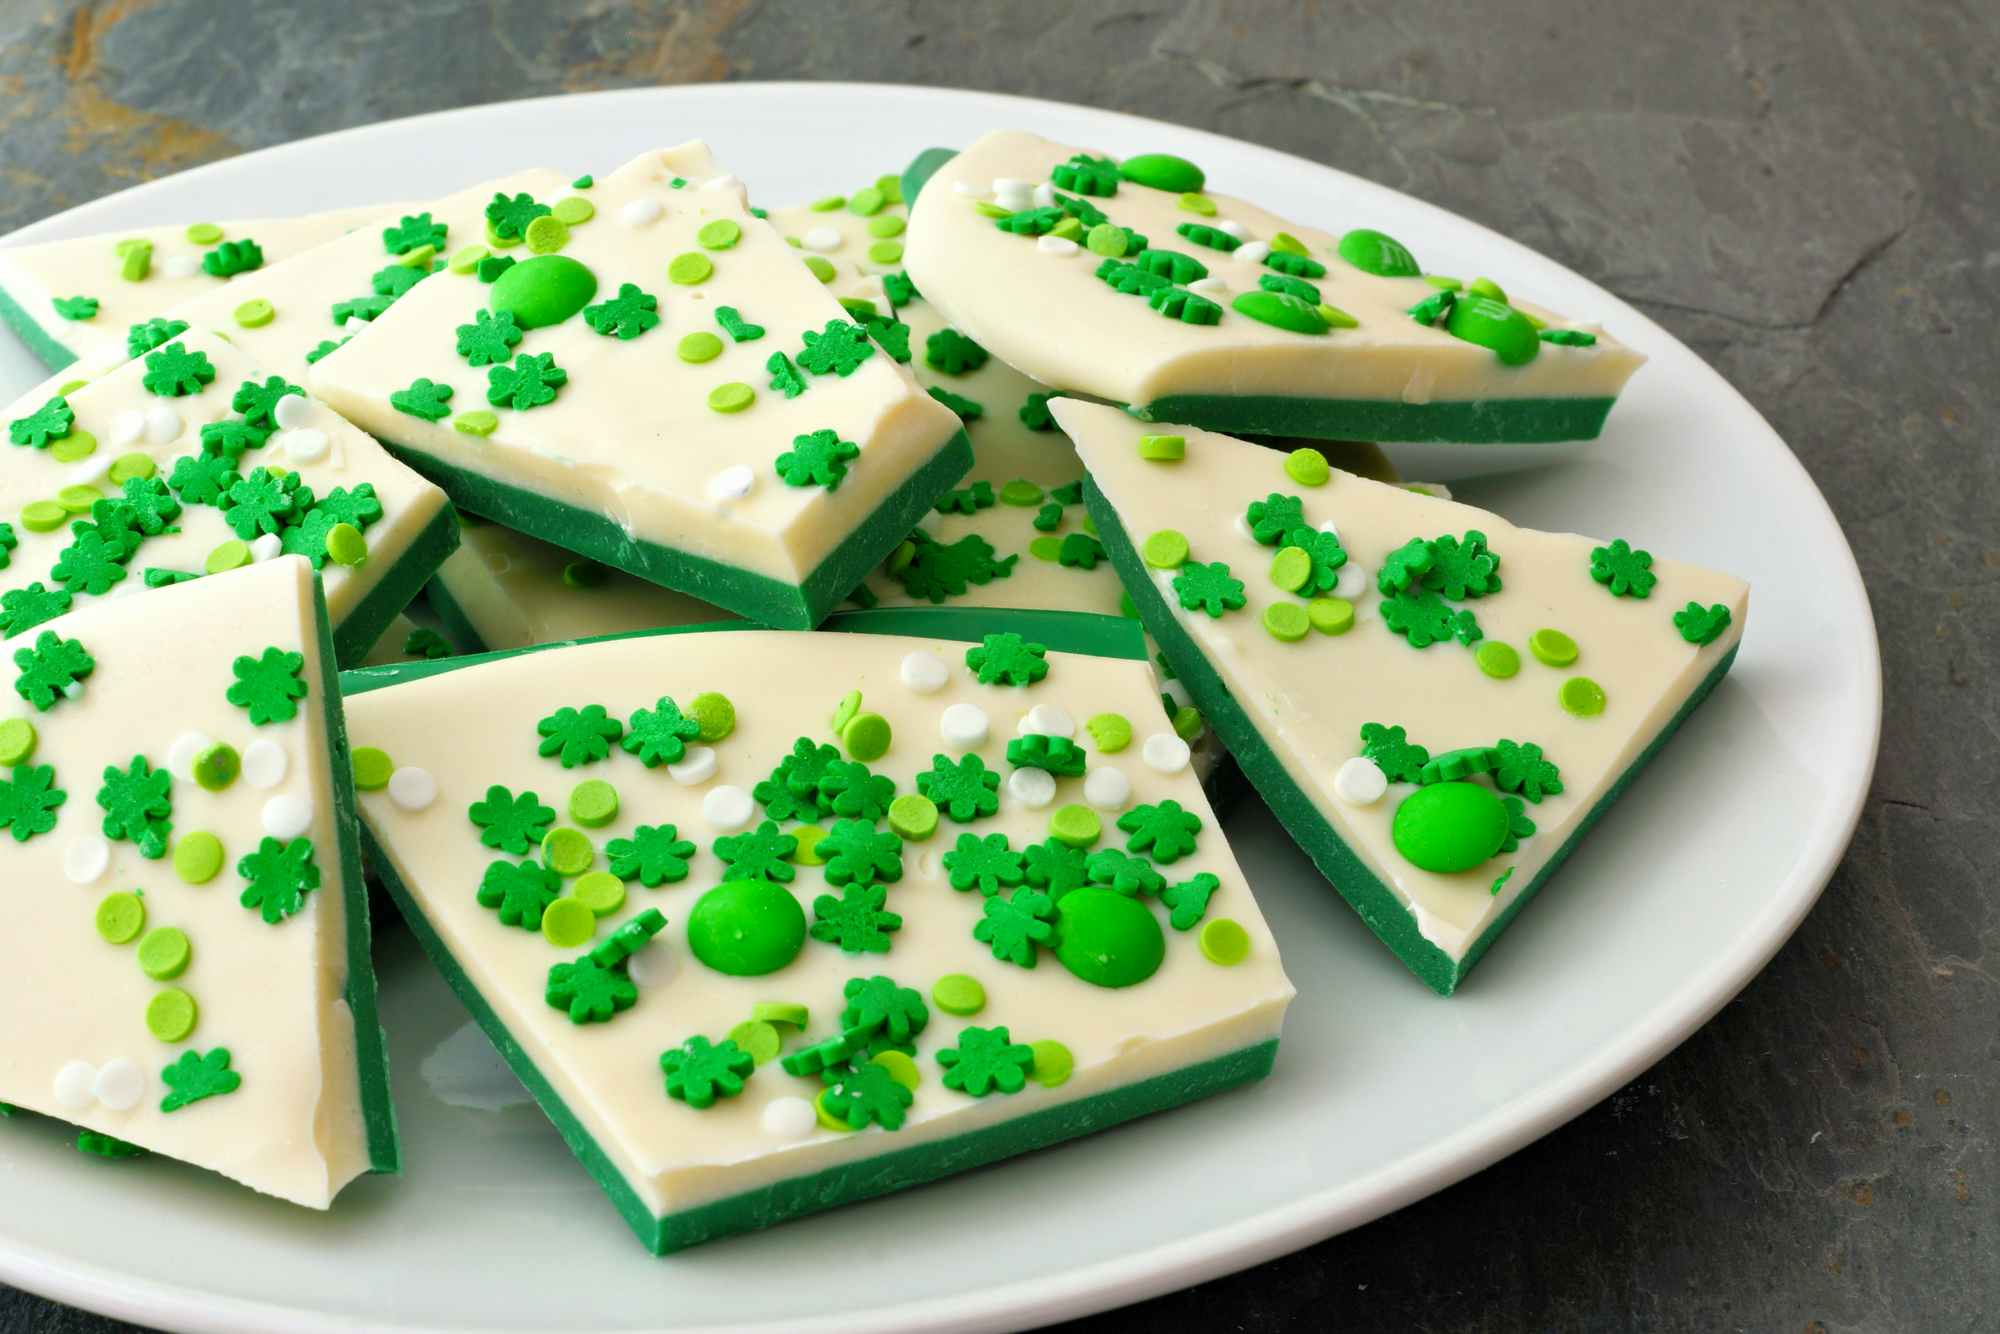 Chocolate bark decorated with green and shamrock candies